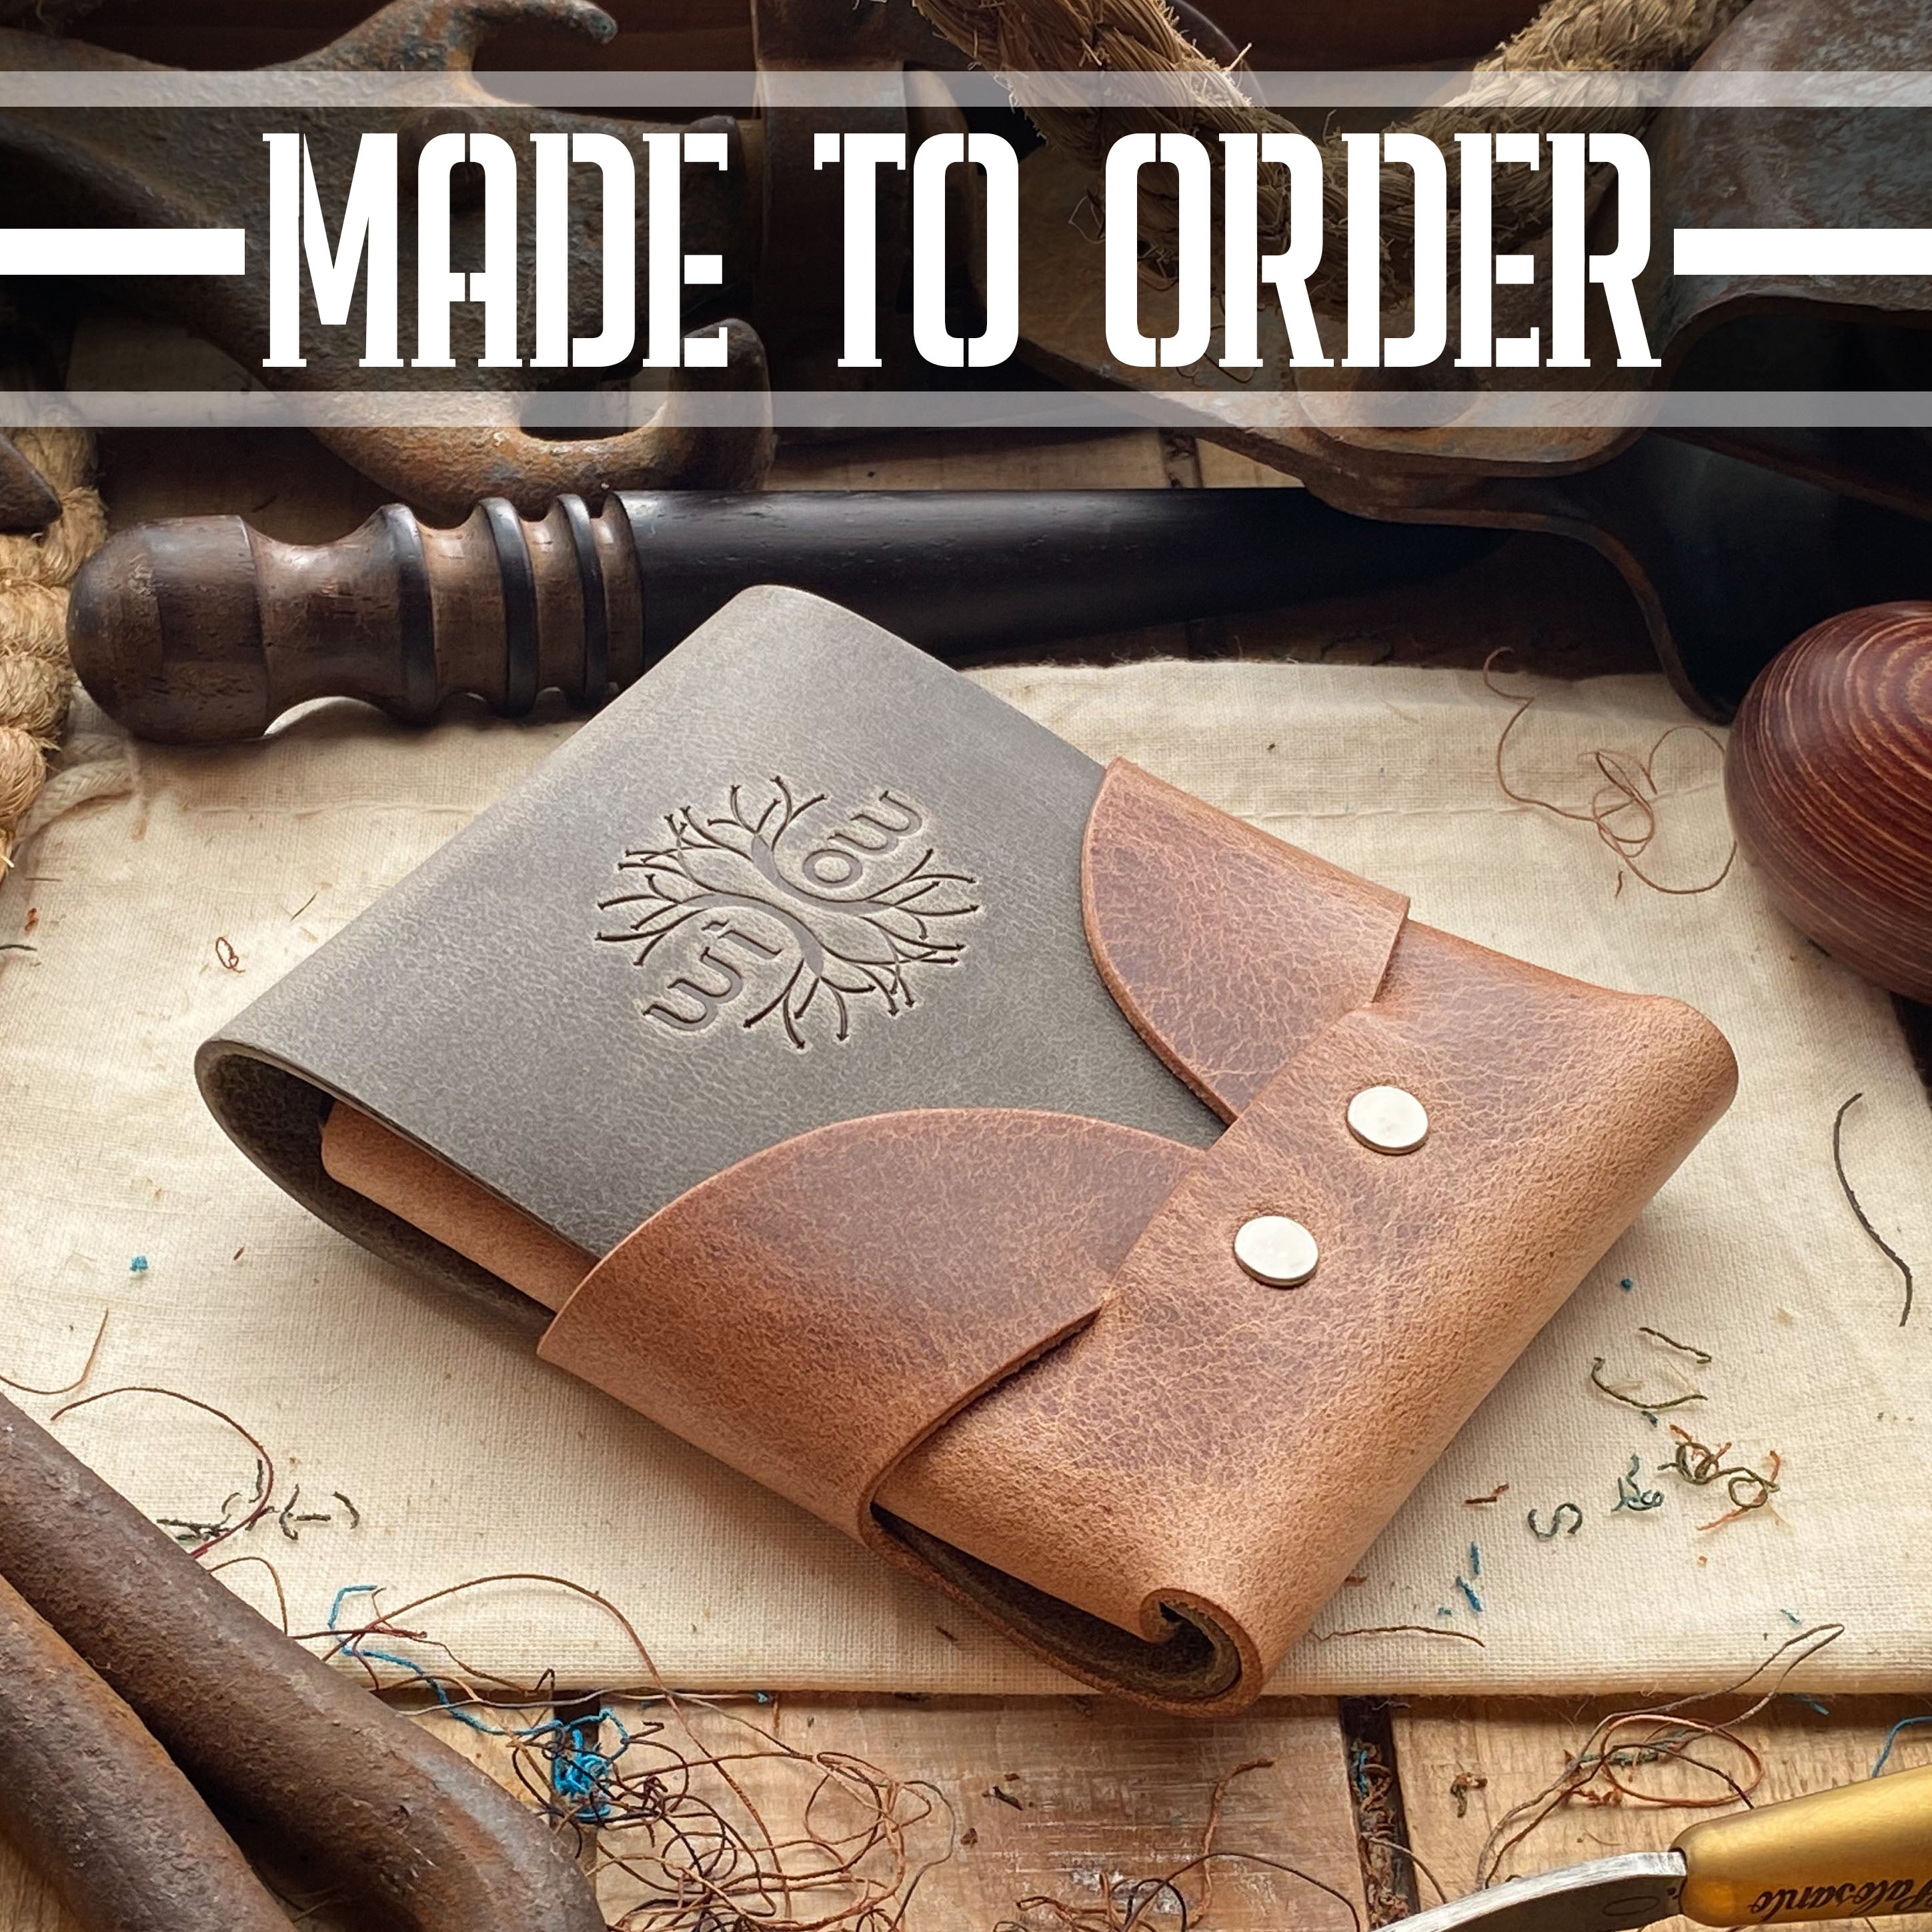 KEY POUCH IN LEATHER FOOTPRINT